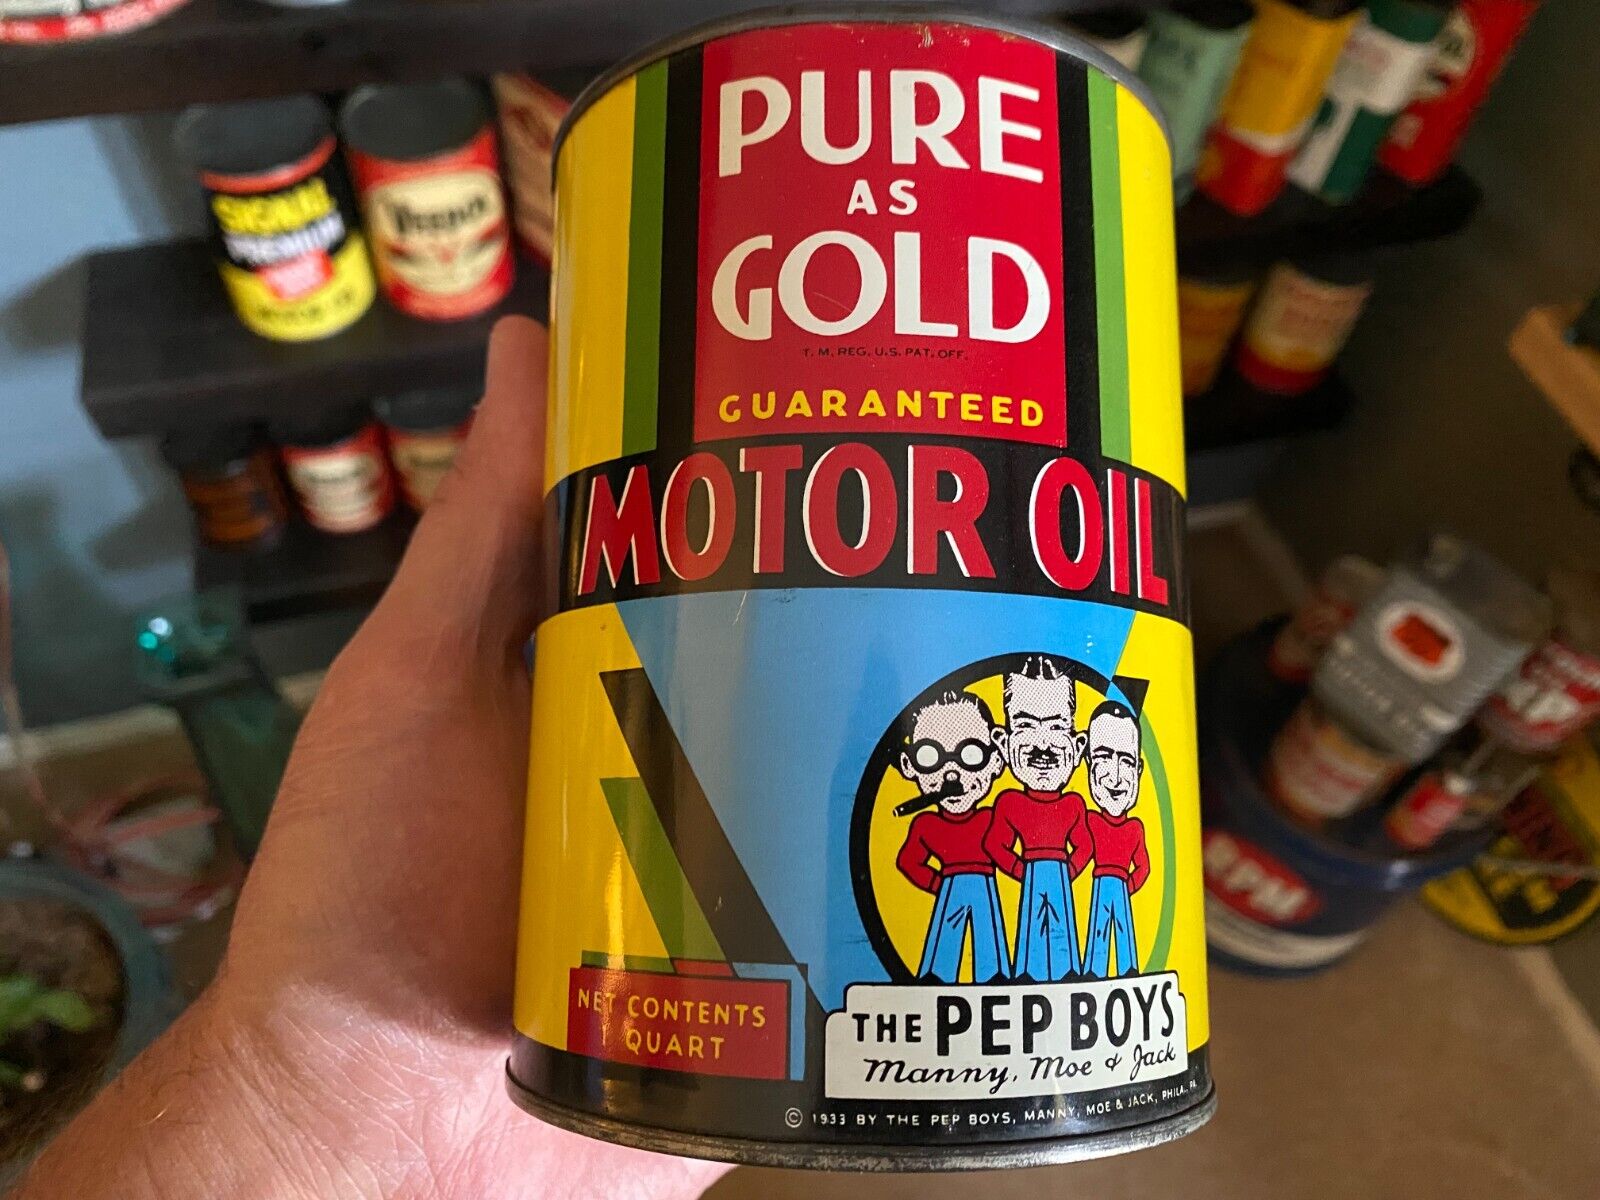 VINTAGE 1933 FULL NOS PEP BOYS PURE AS GOLD 1 QUART MOTOR OIL CAN- PA NICE MINTY